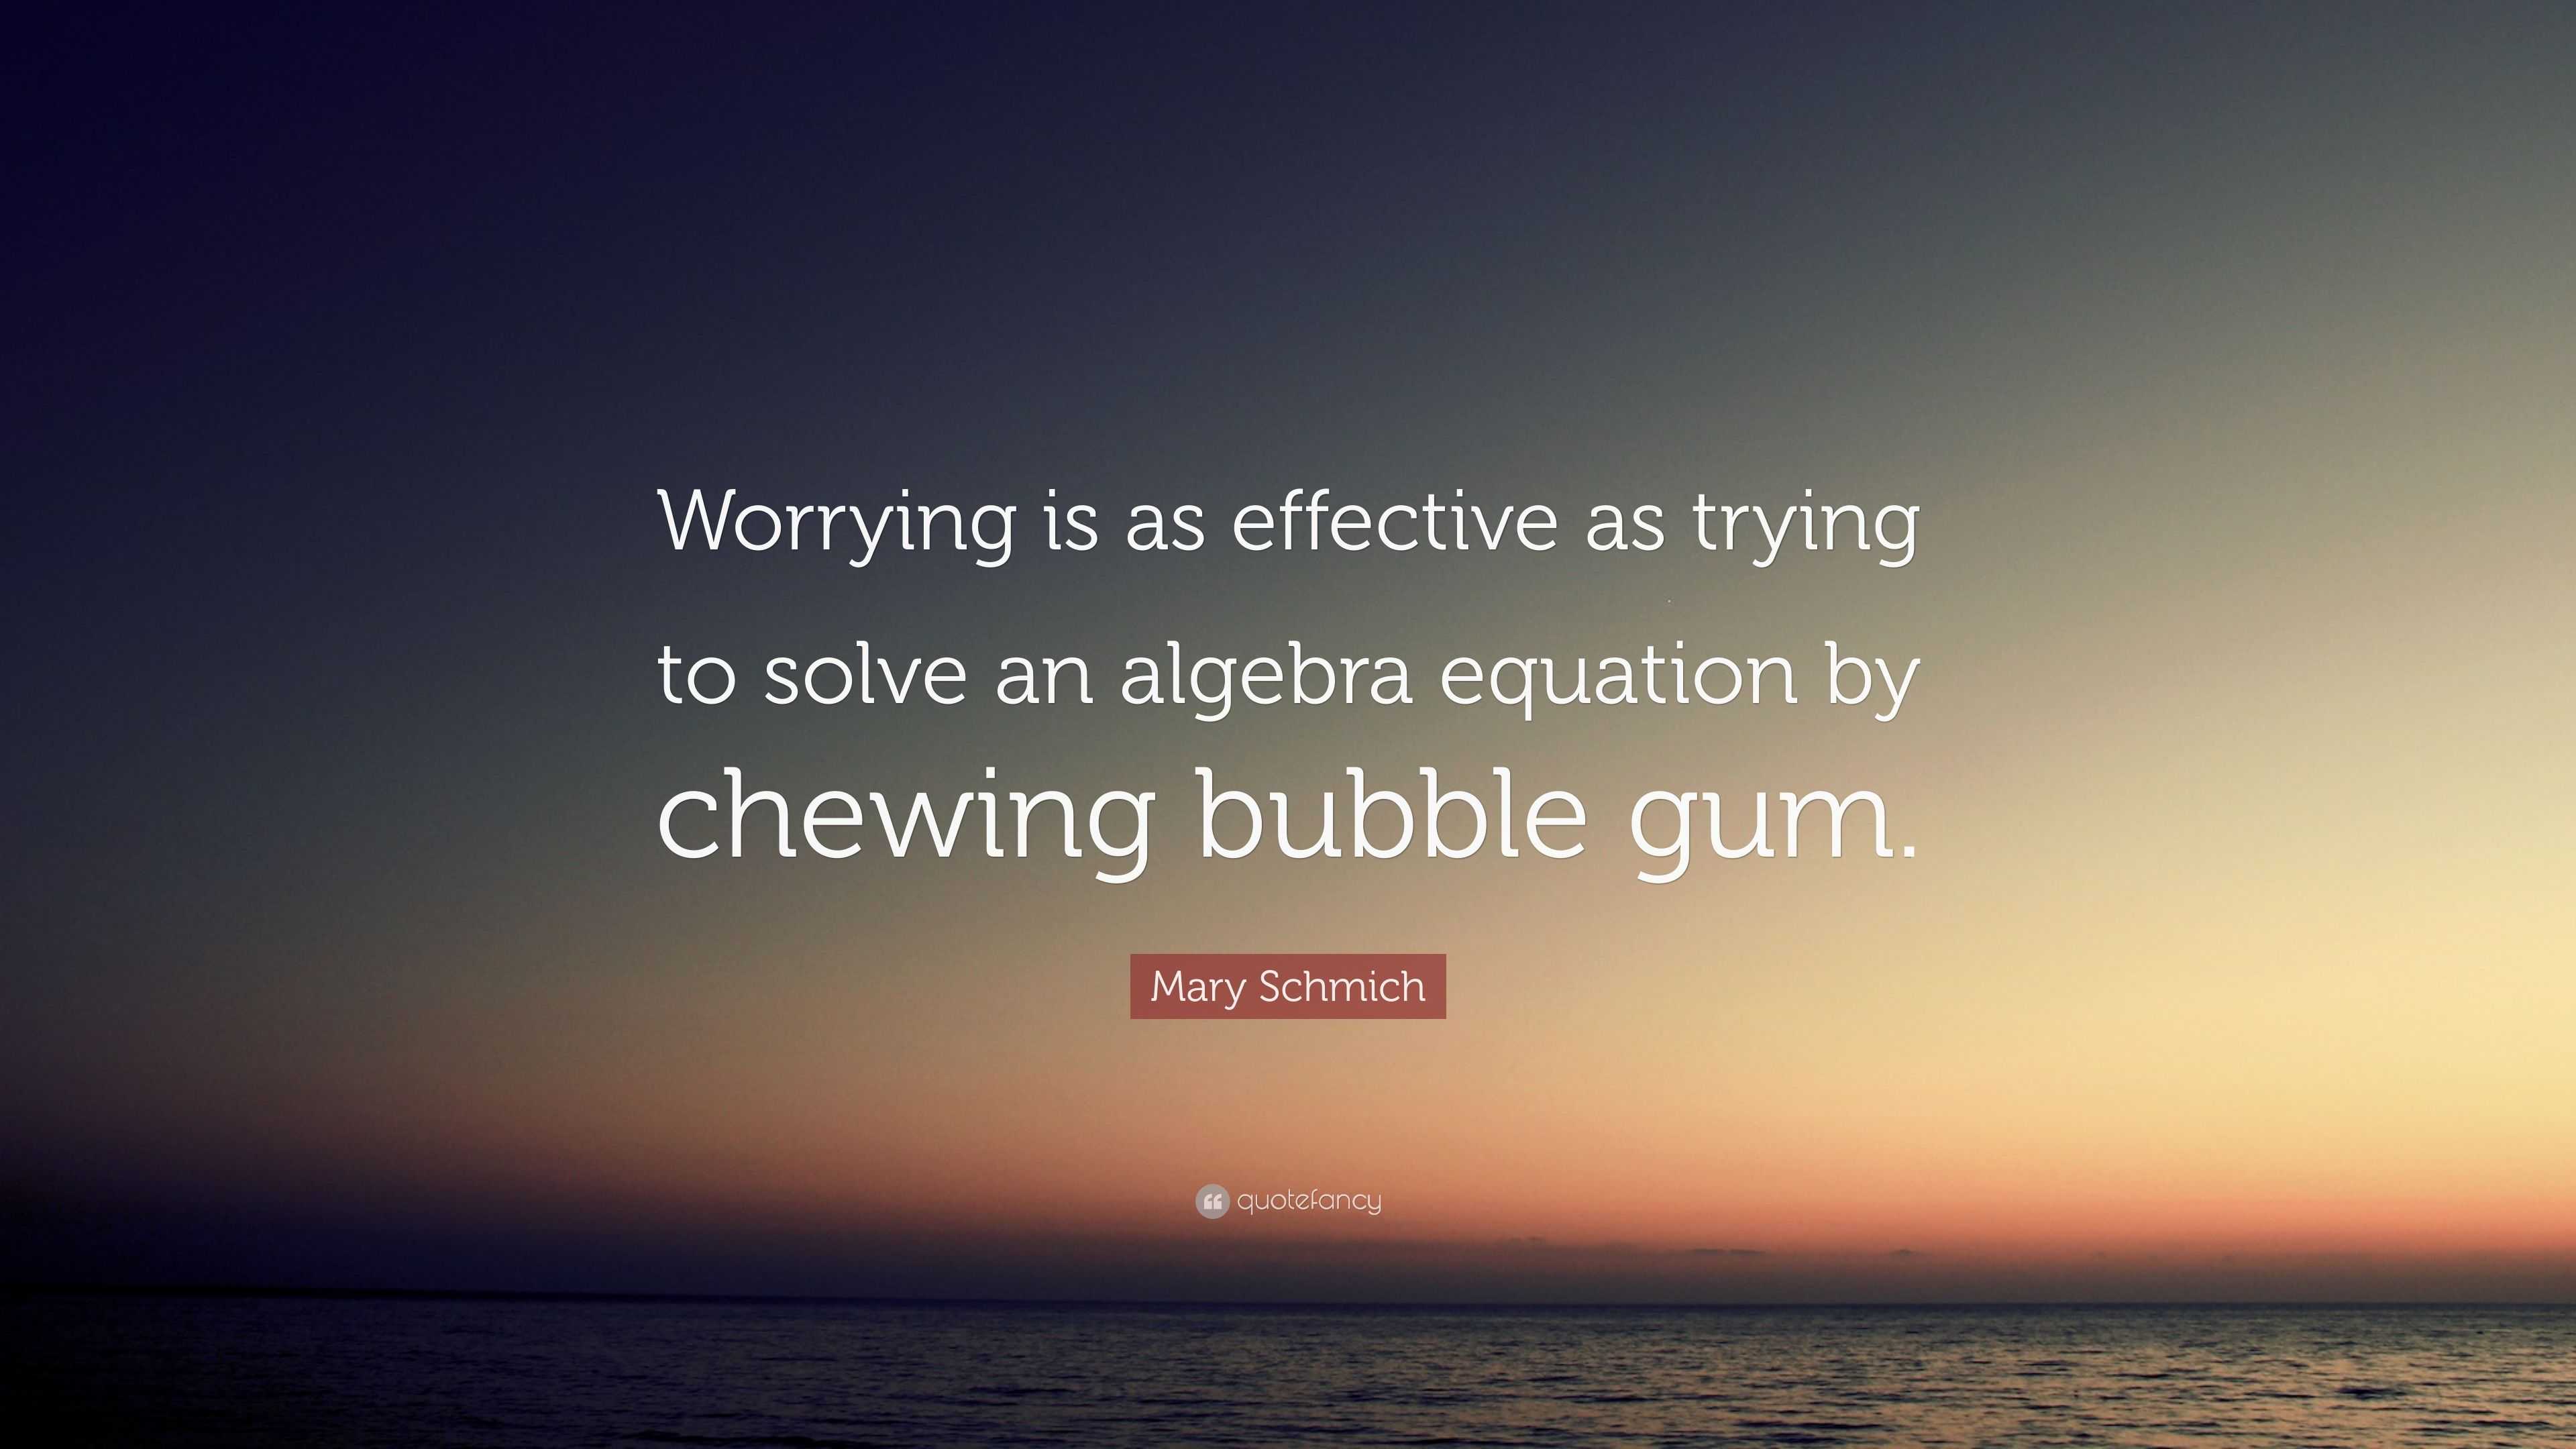 worrying is like trying to solve an algebra problem by chewing gum